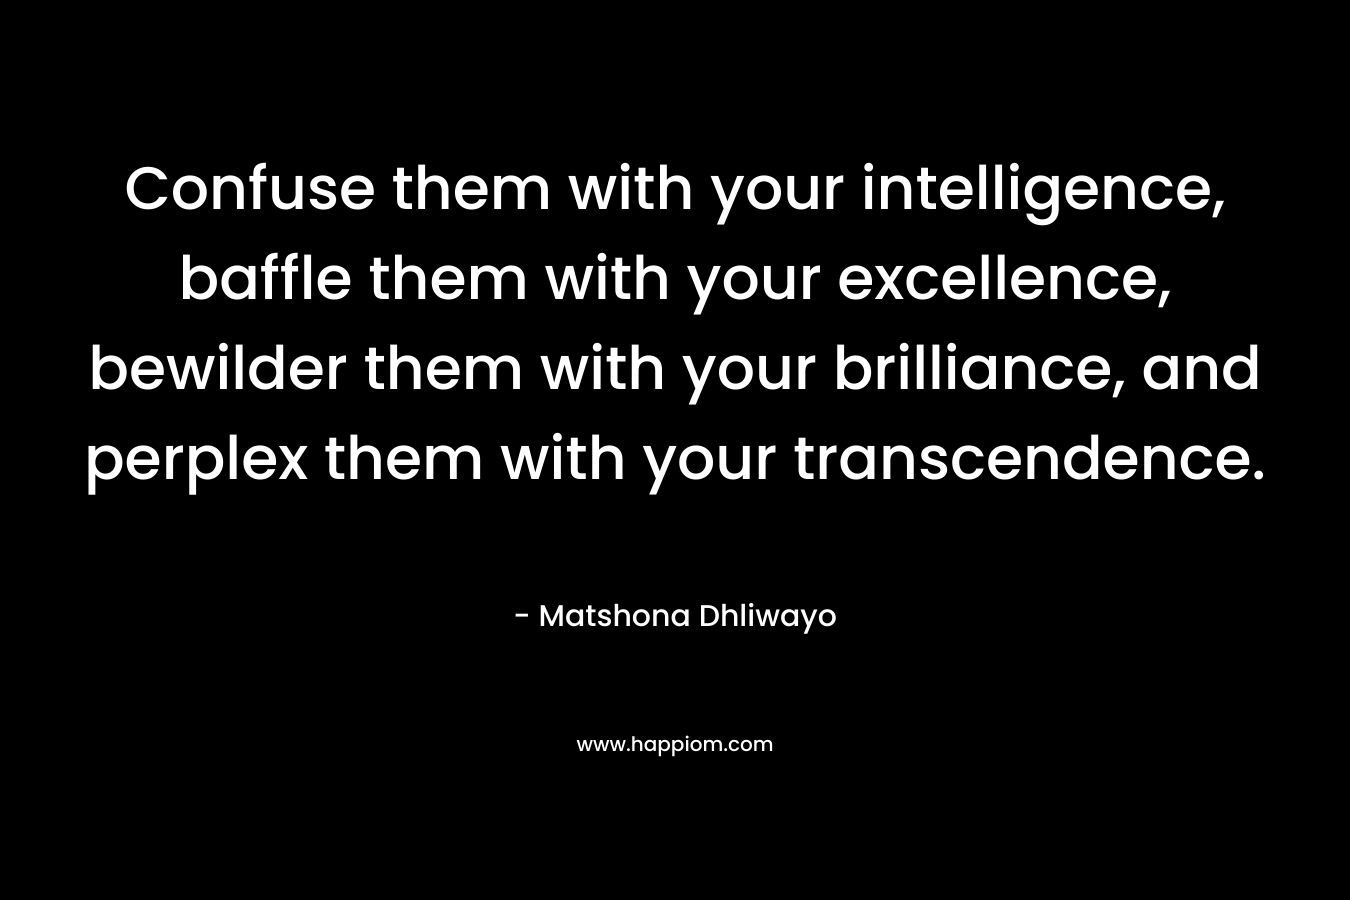 Confuse them with your intelligence, baffle them with your excellence, bewilder them with your brilliance, and perplex them with your transcendence. – Matshona Dhliwayo